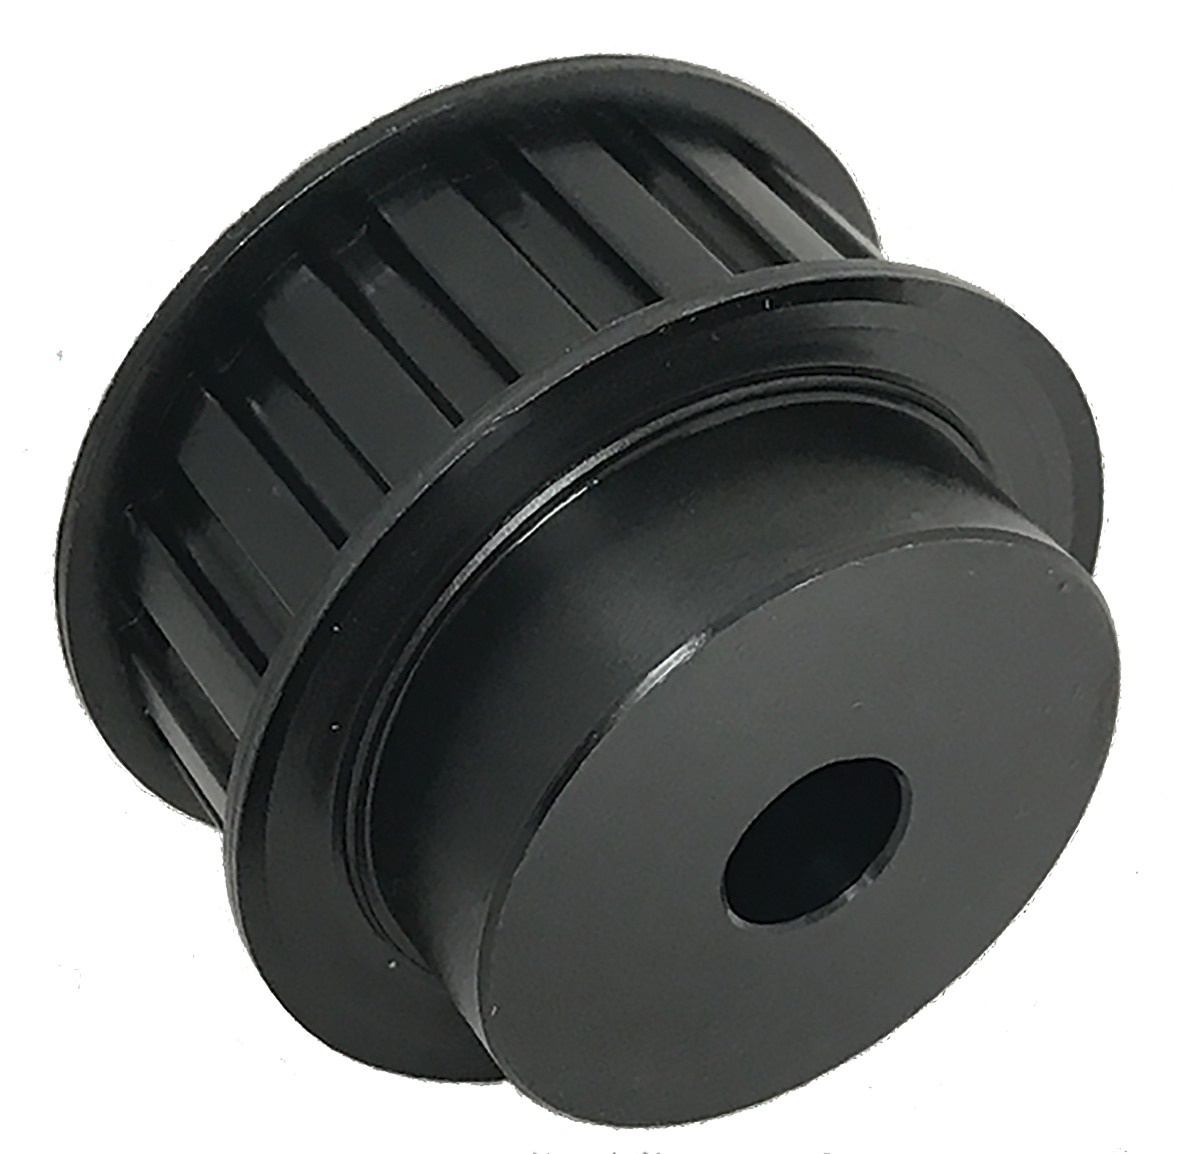 18H200-6FS8 - Steel Imperial Pitch Pulleys